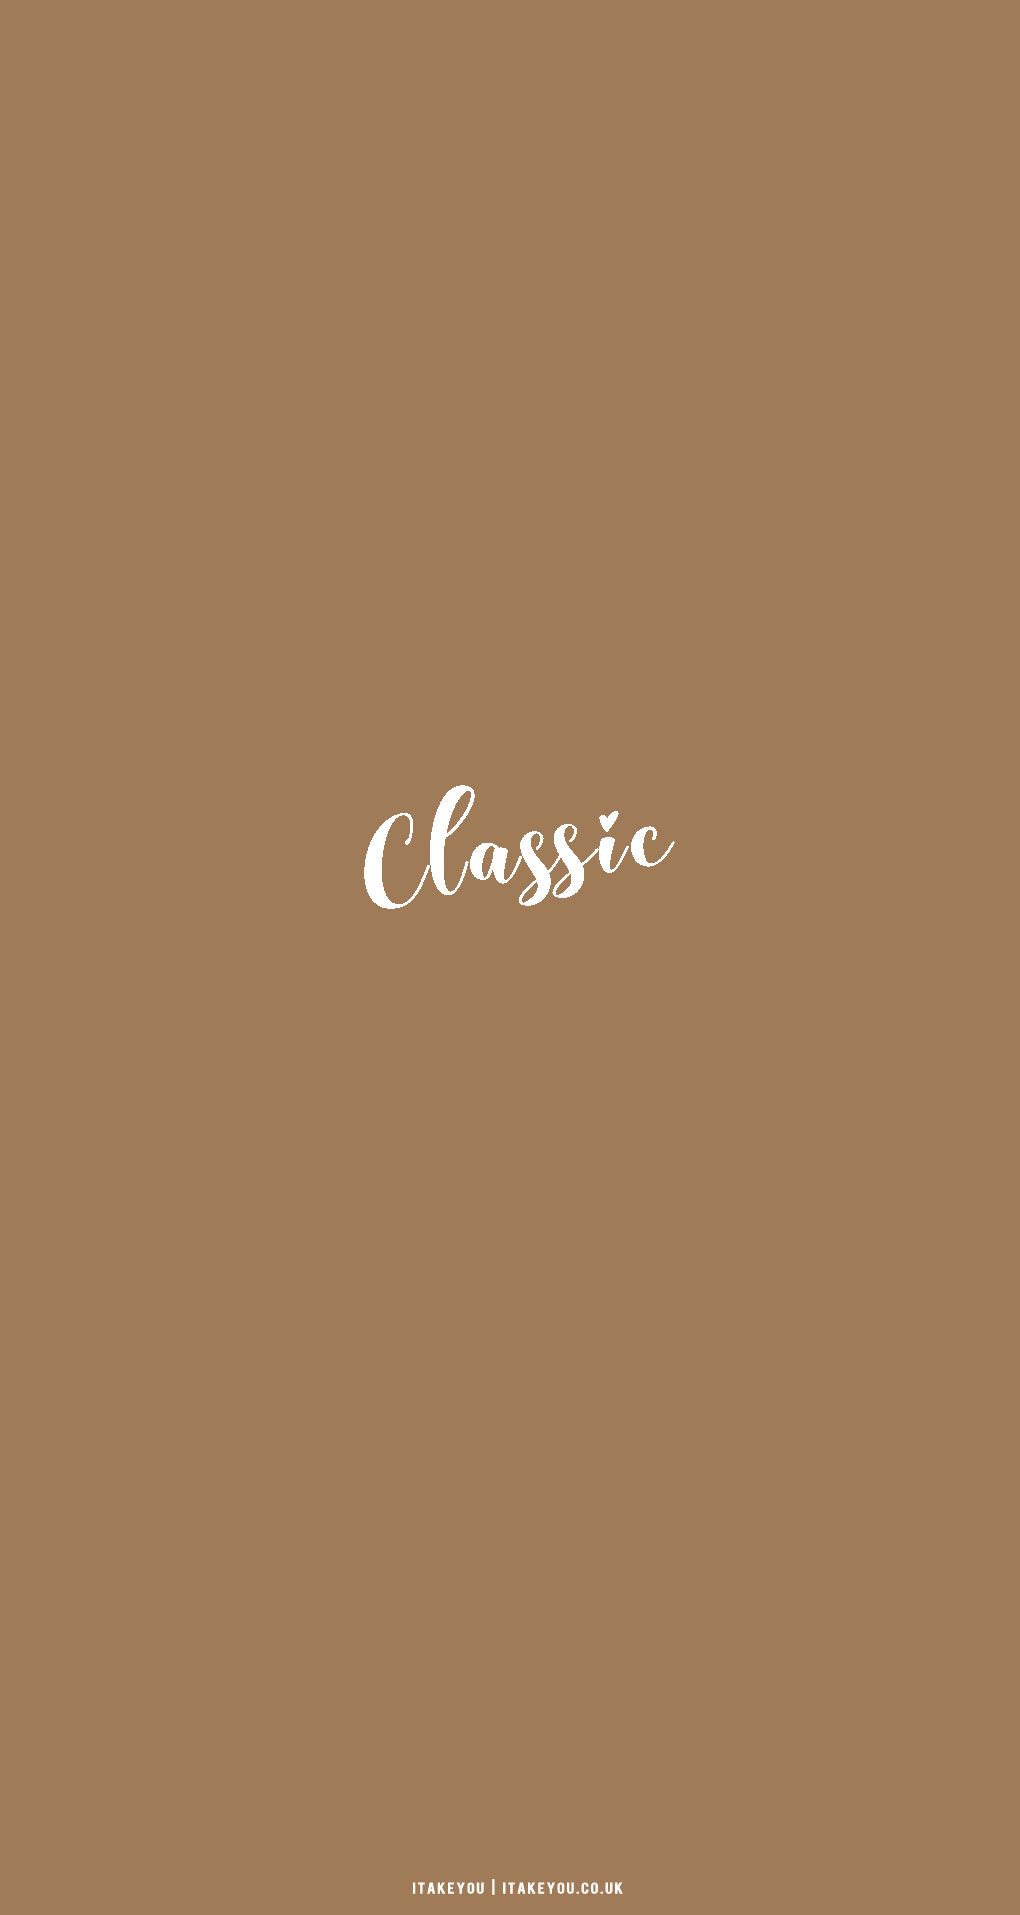 Classic free phone background to download on the blog. - Light brown, Vogue